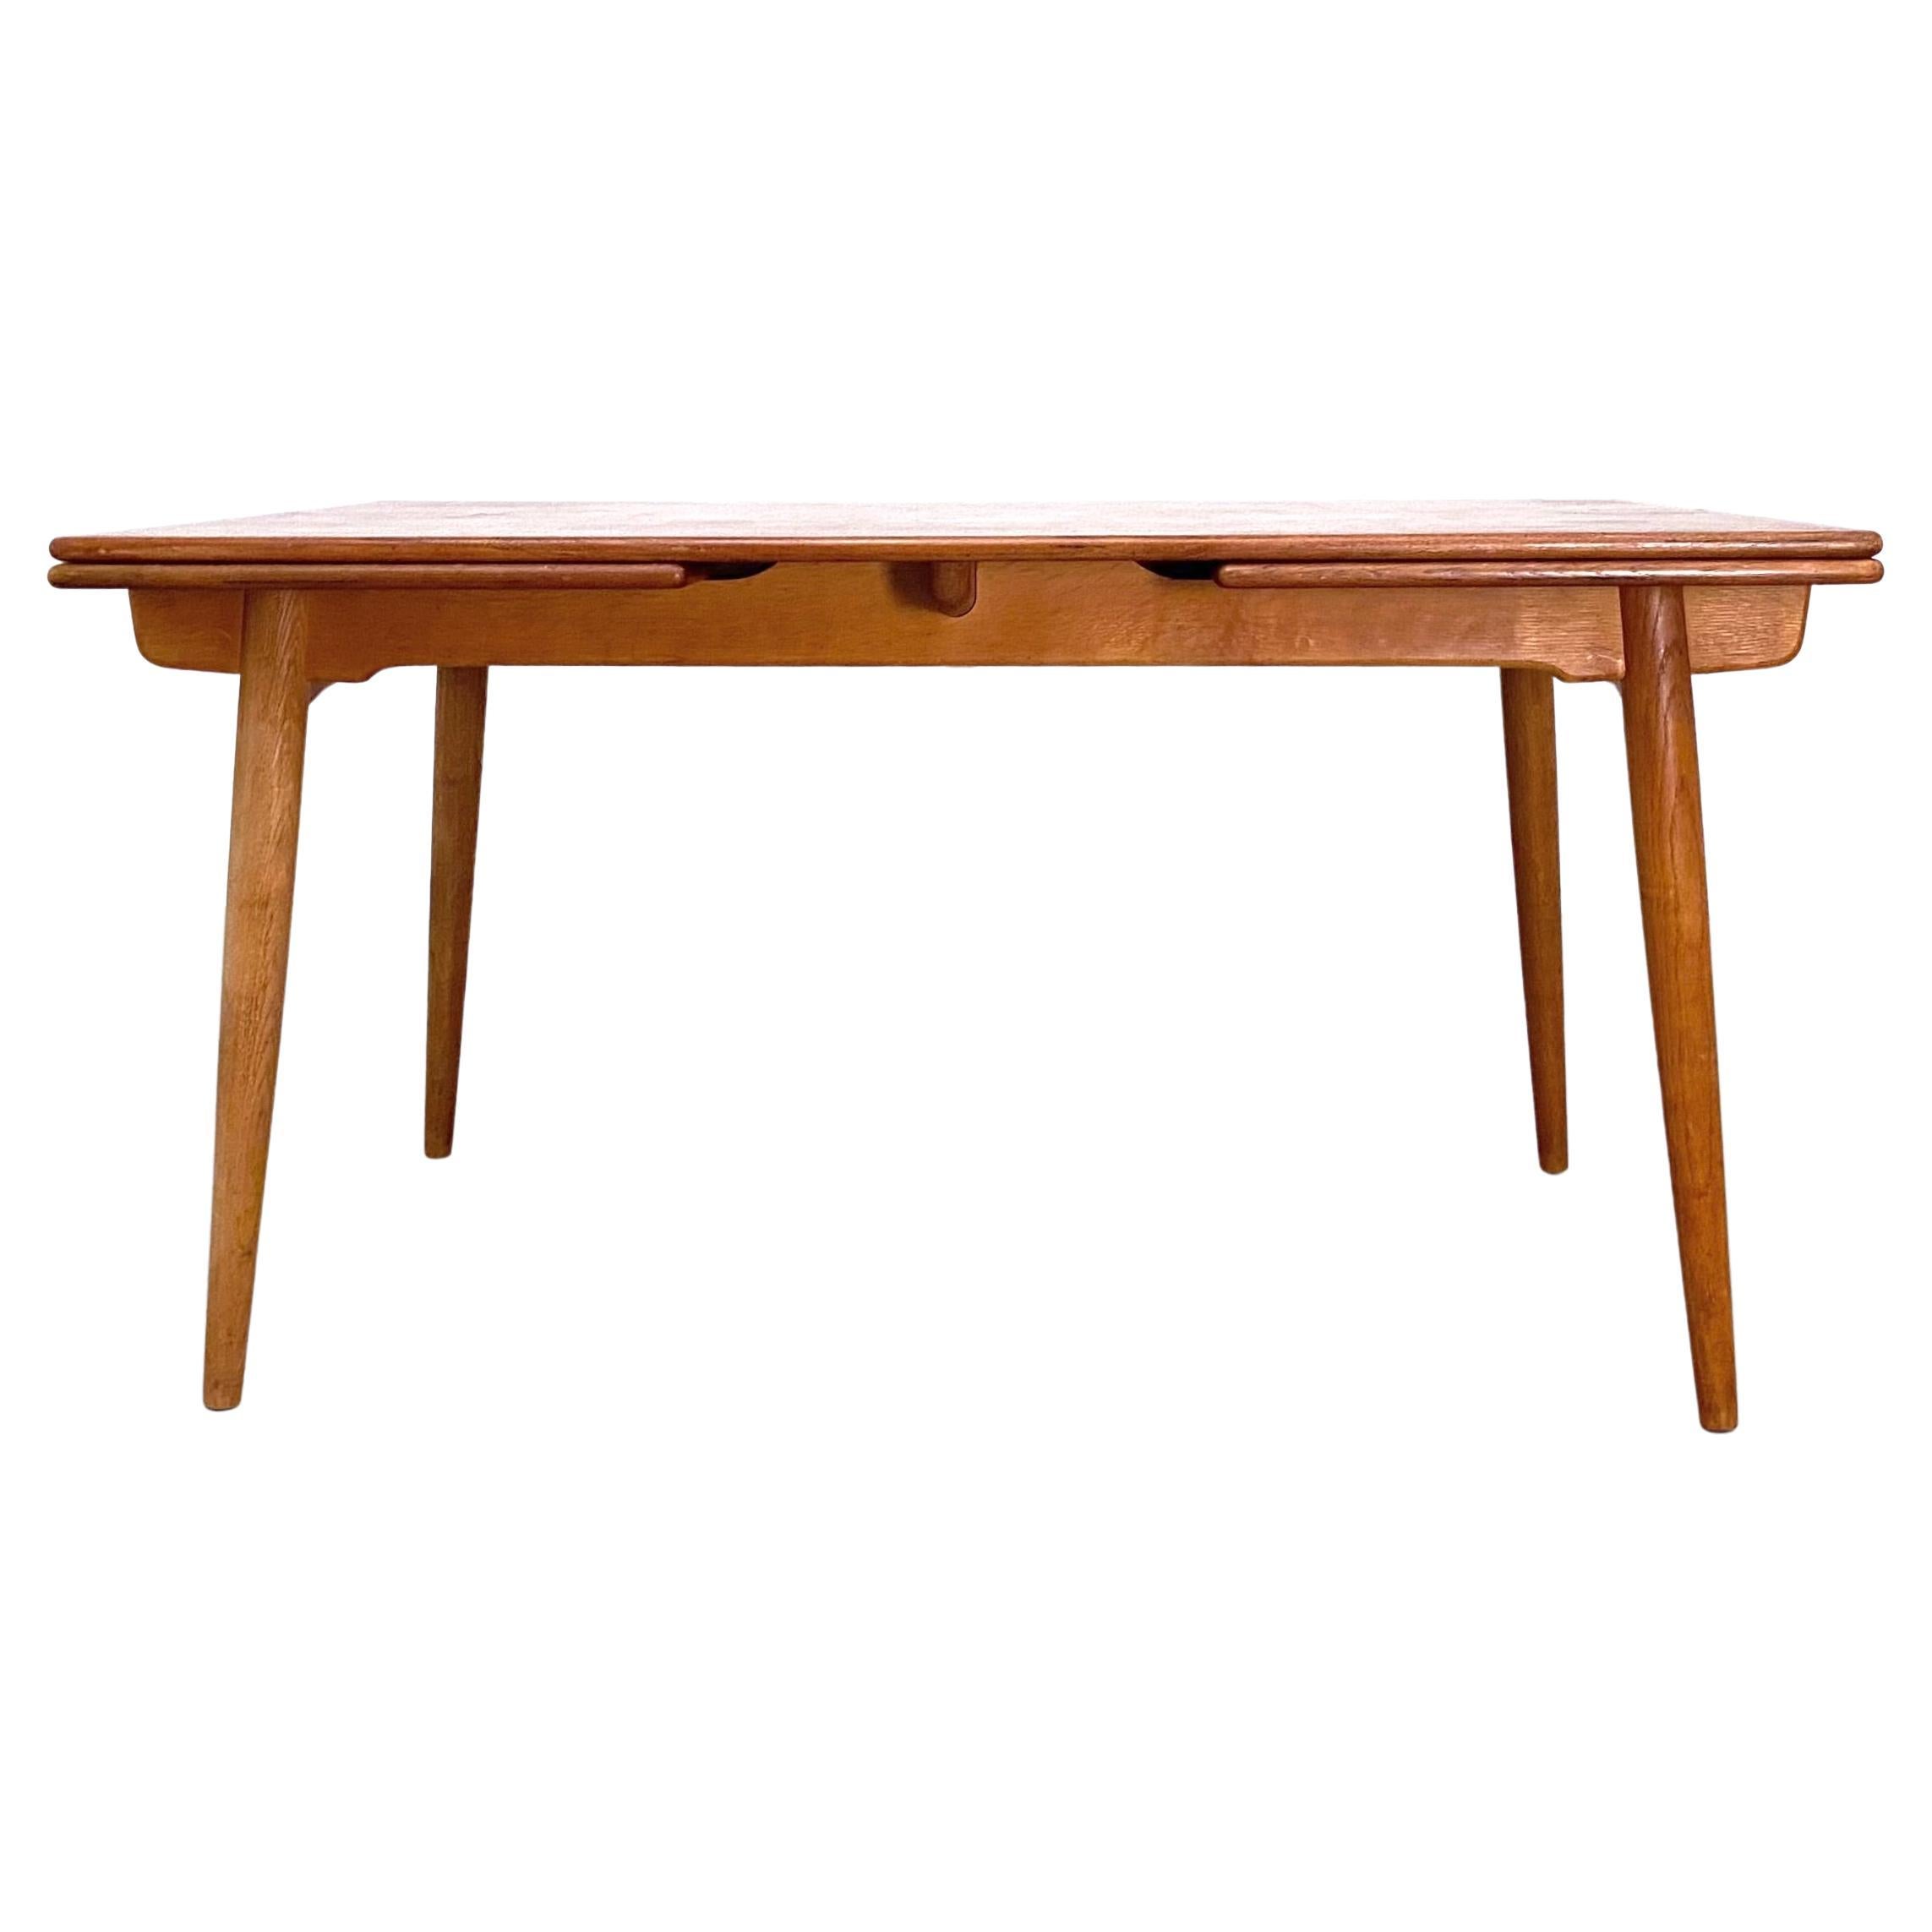 Dining Table AT 312 by Hans Wegner for Andreas Tuck in Oak, Denmark, 1960's For Sale